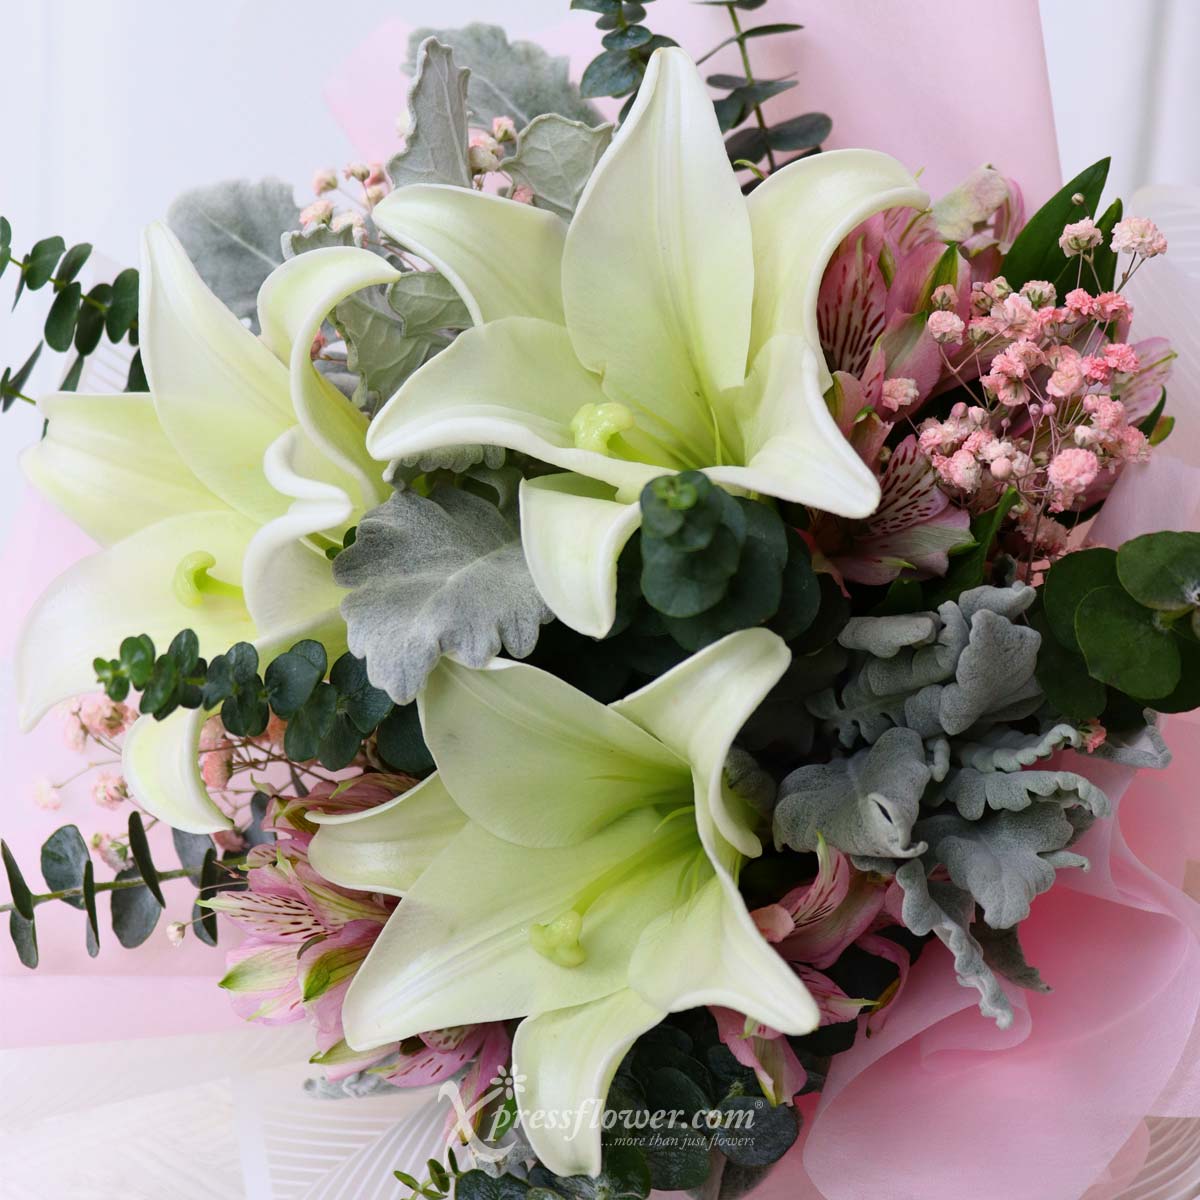 BQ2309 Majestic Devotion (3 White Lilies with Pink Million Star Baby’s Breath) 1d